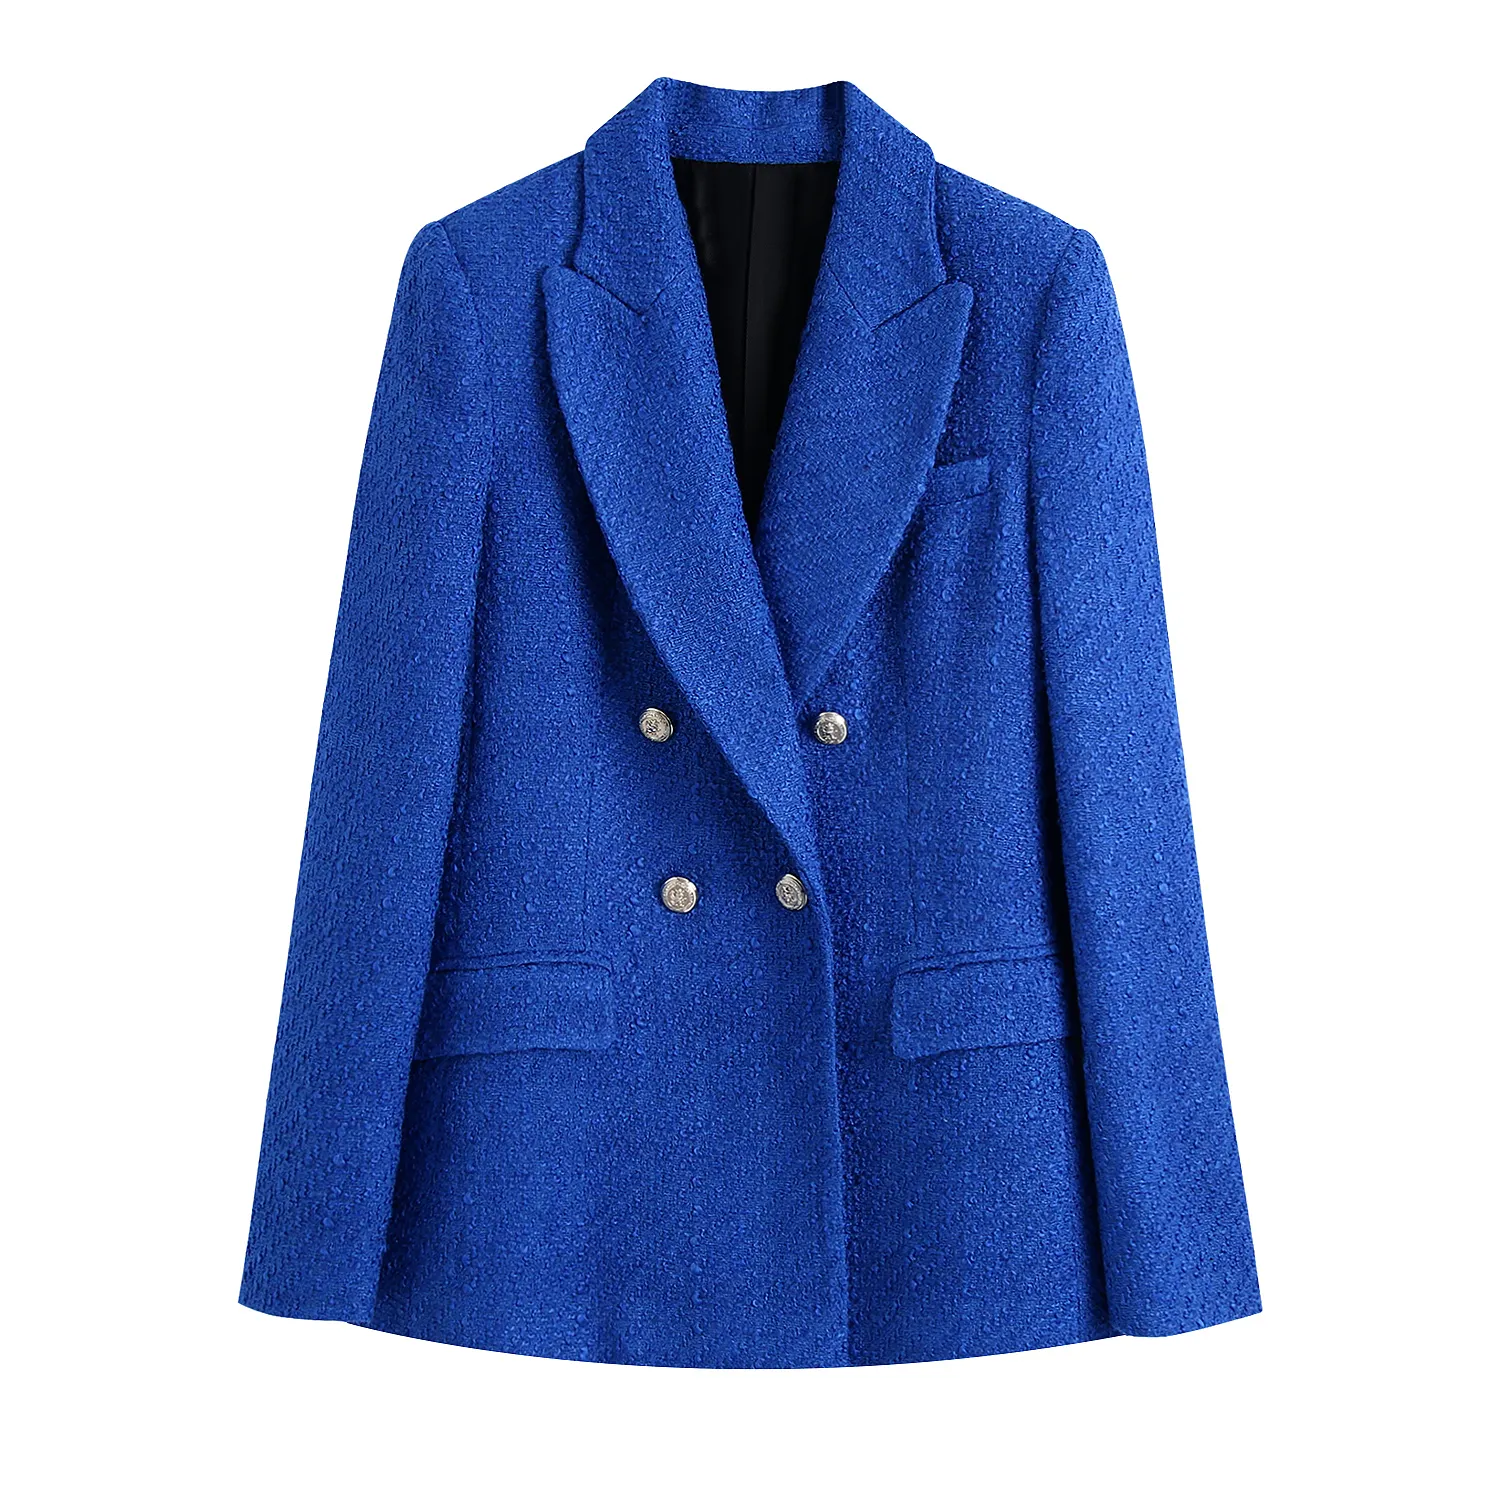 Blue color long sleeve notched collar ladies tweed jacket double breasted women slim fit blazer